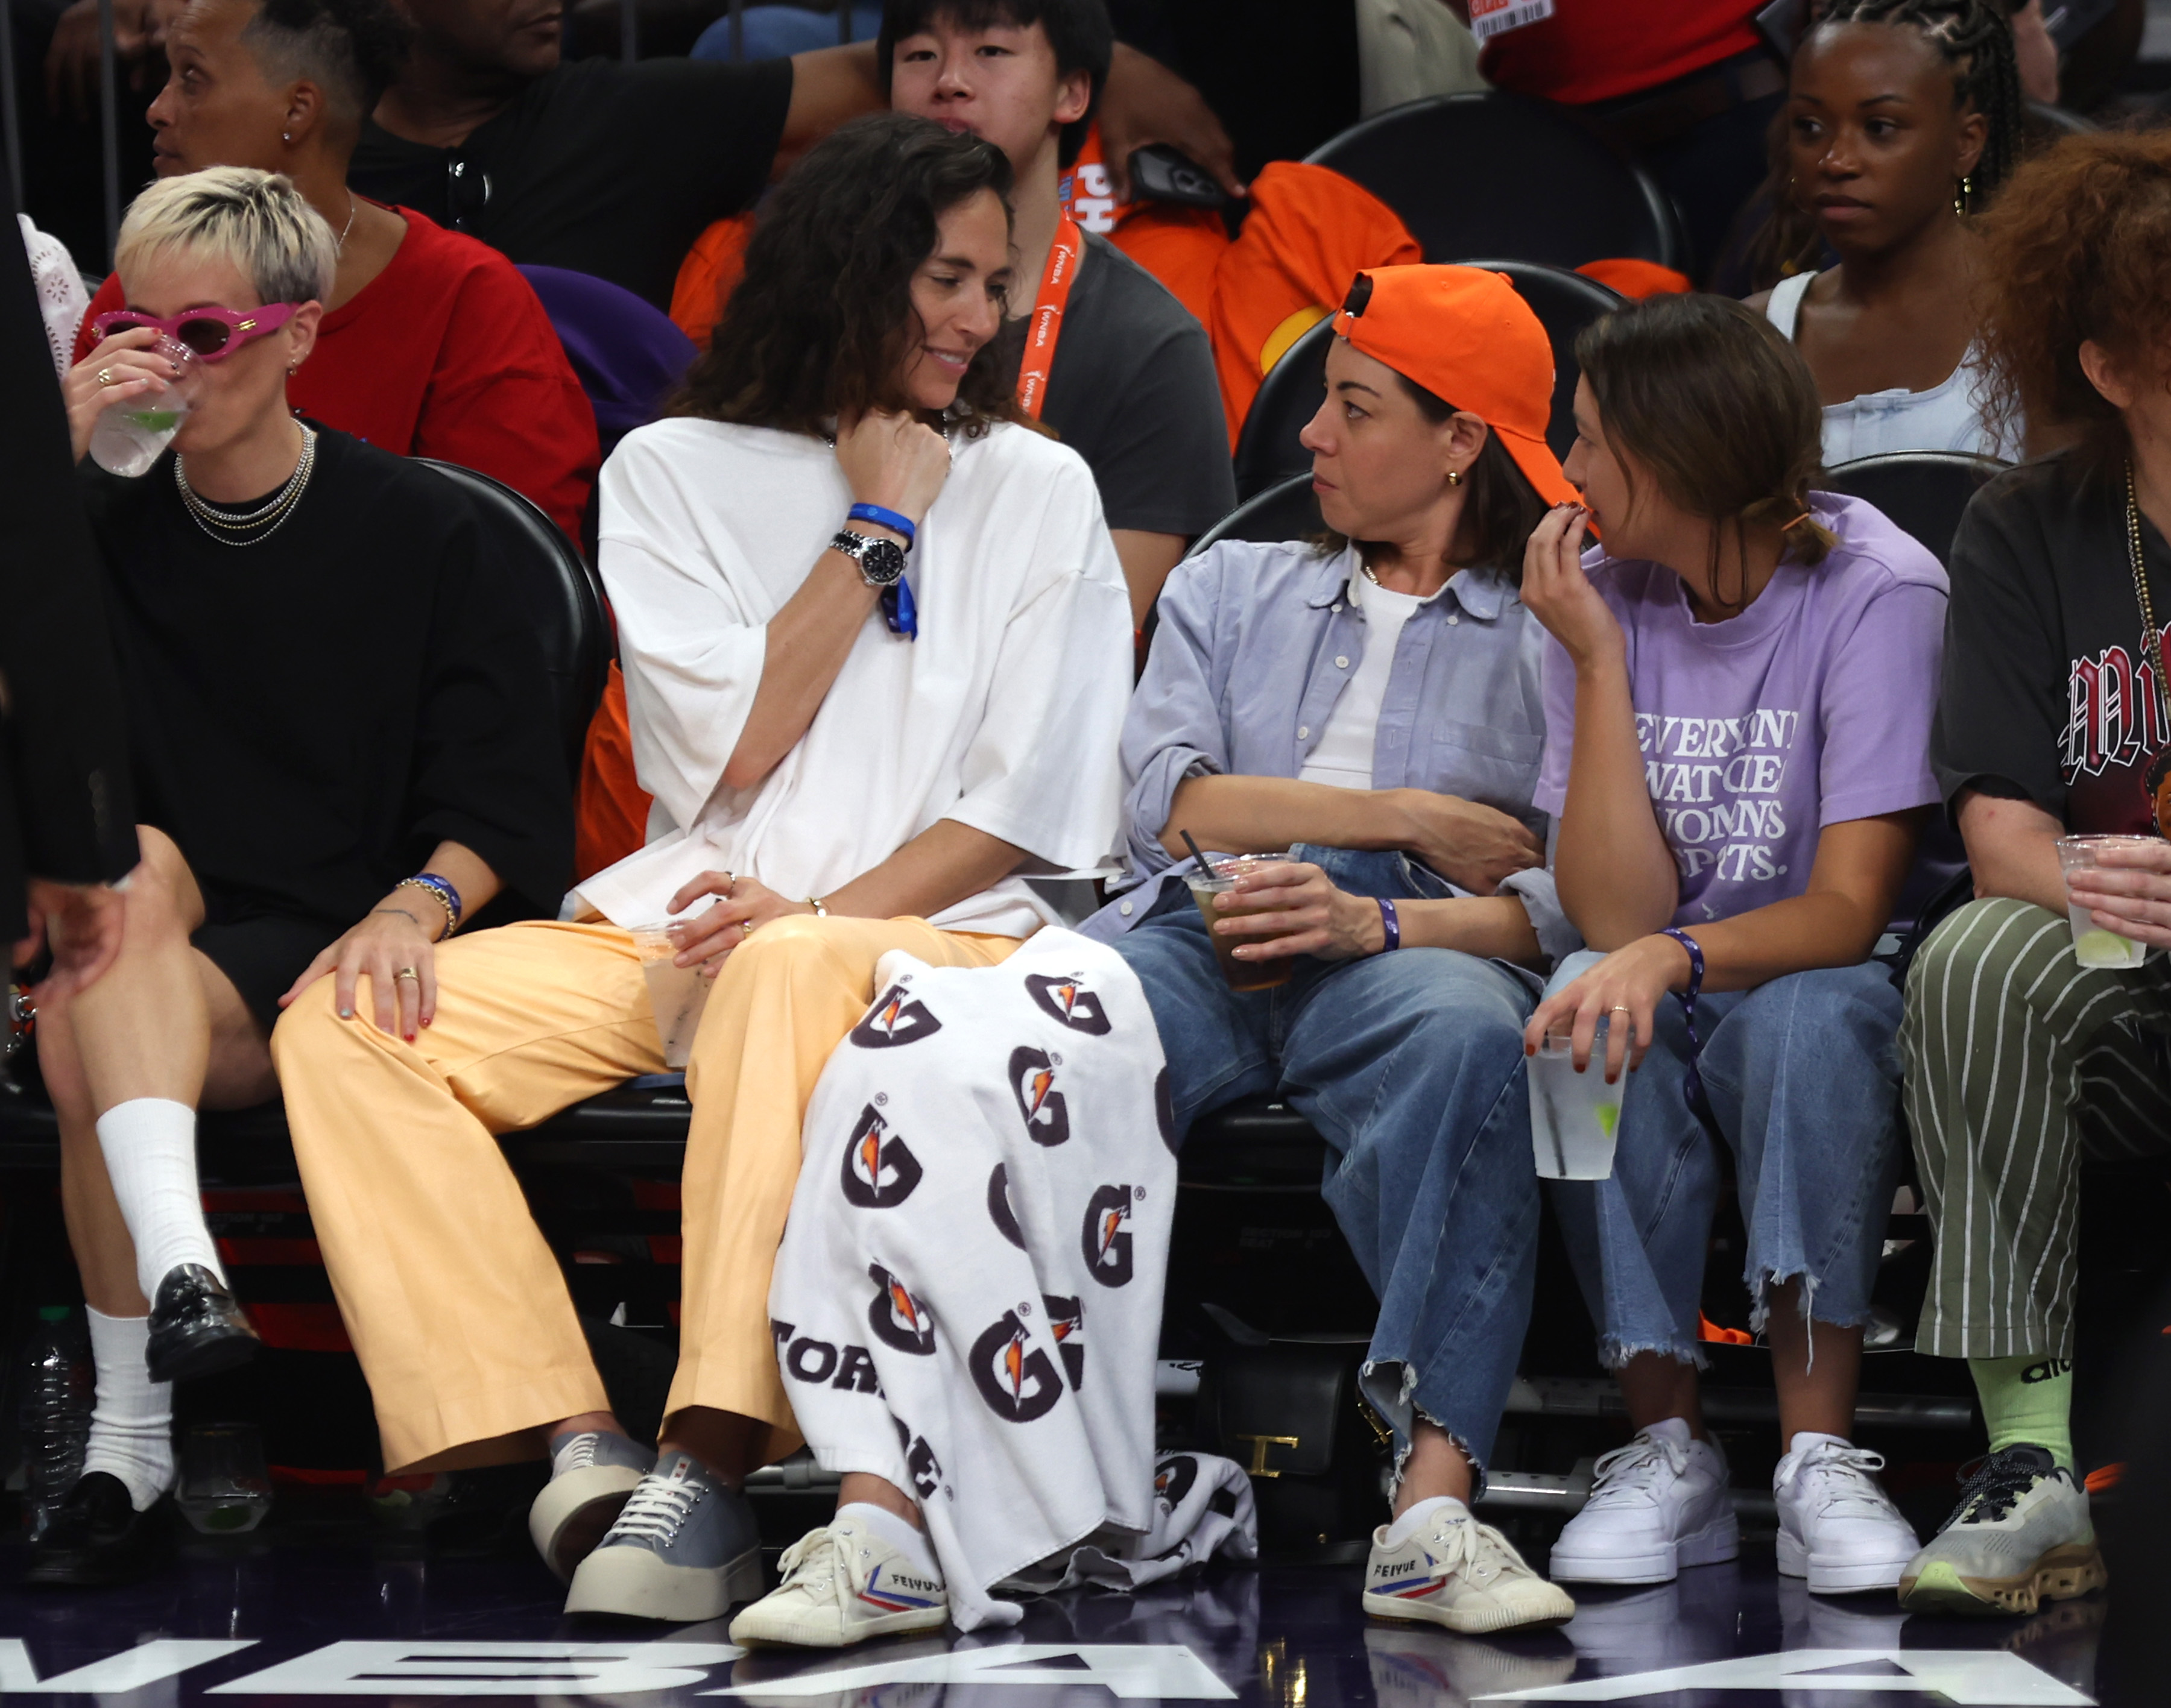 Aubrey Plaza was seen with crutches and an ice wrap on her knee during the WNBA All-Star game on July 20